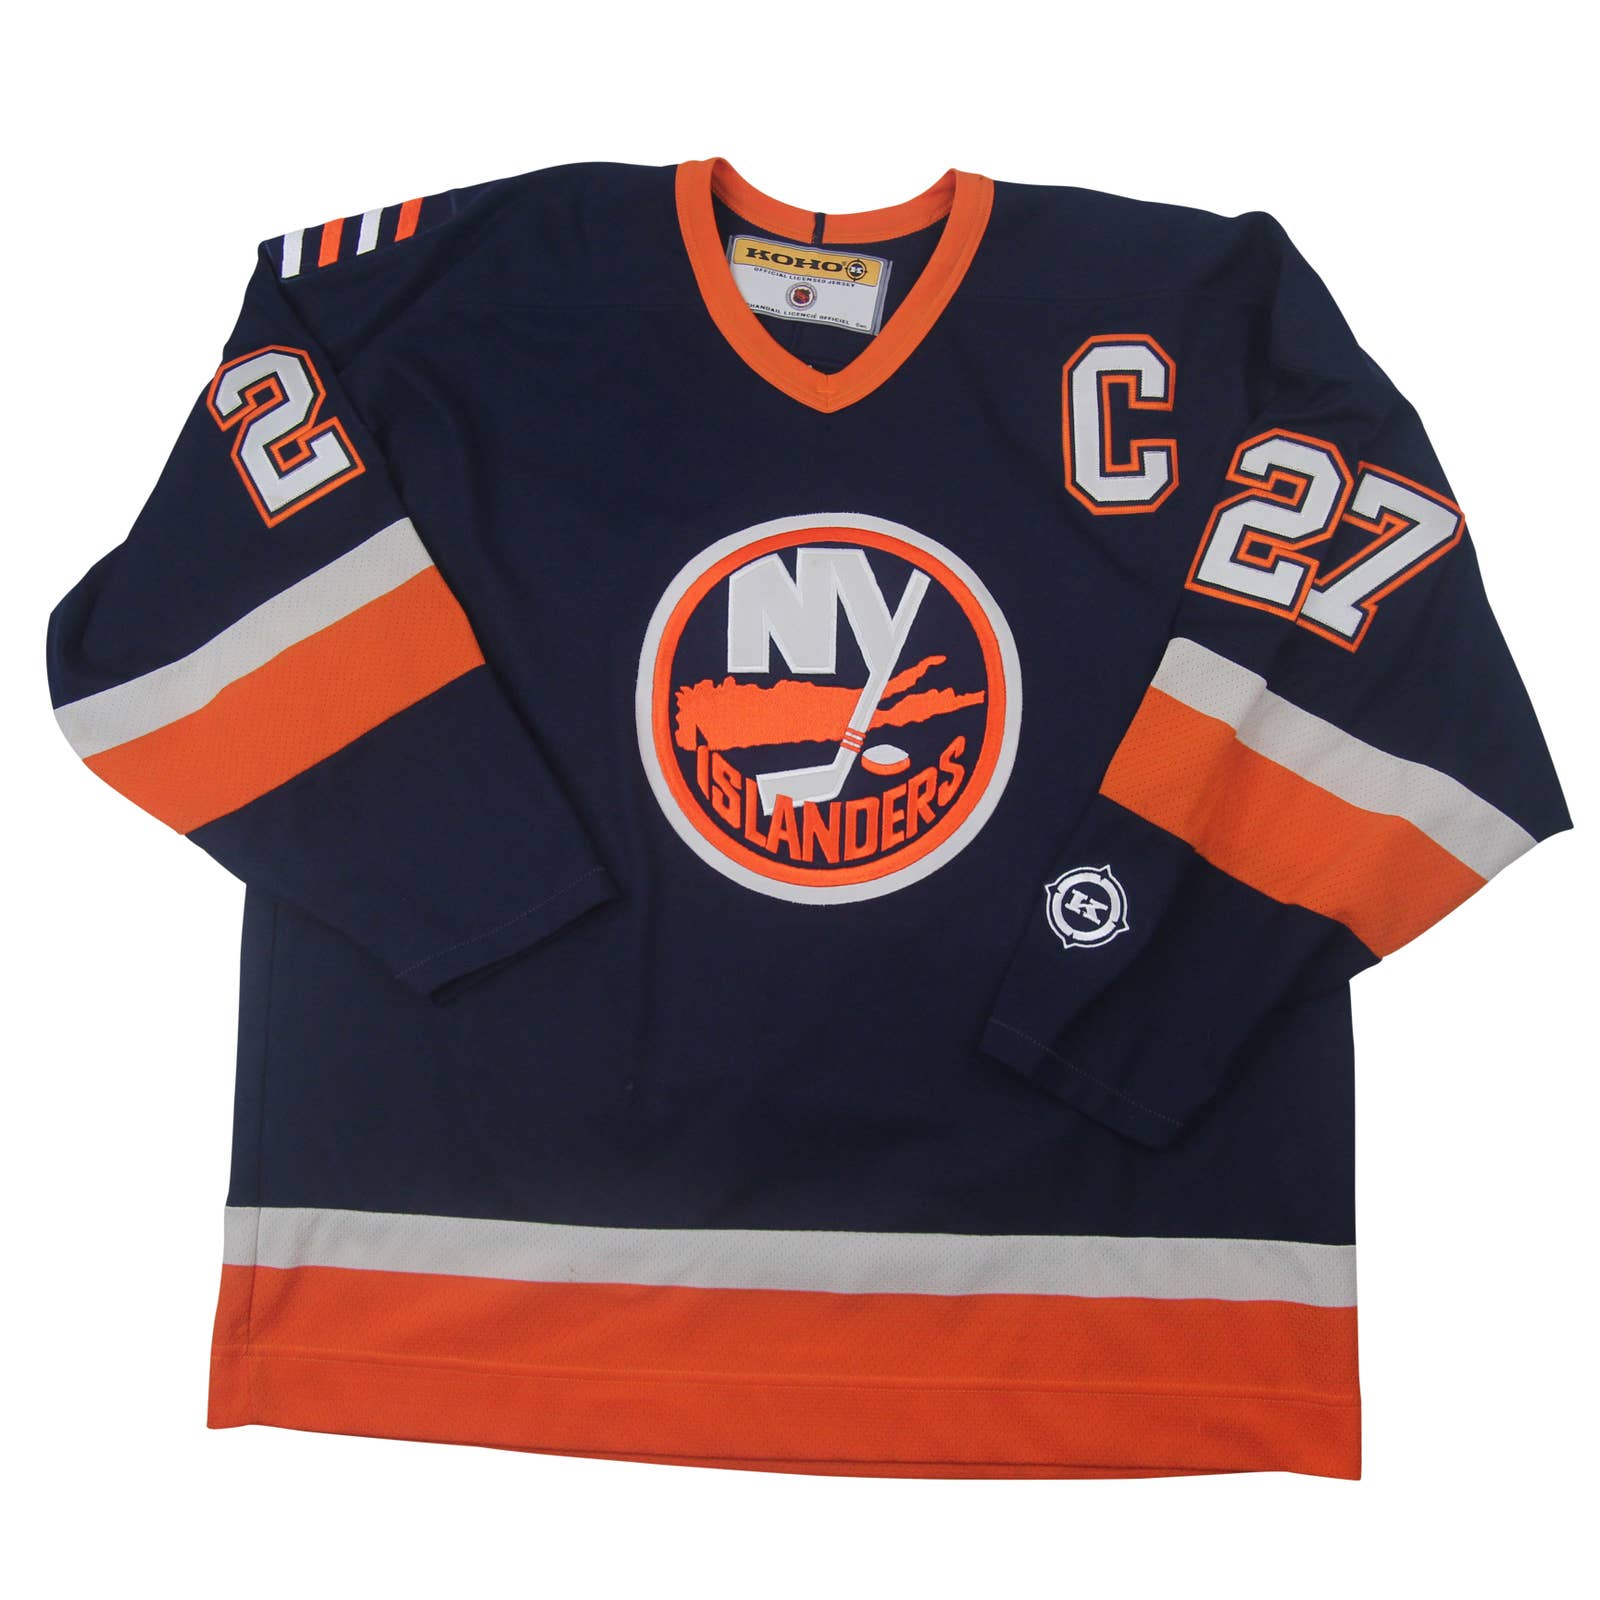 New York Islanders Jerseys  New, Preowned, and Vintage